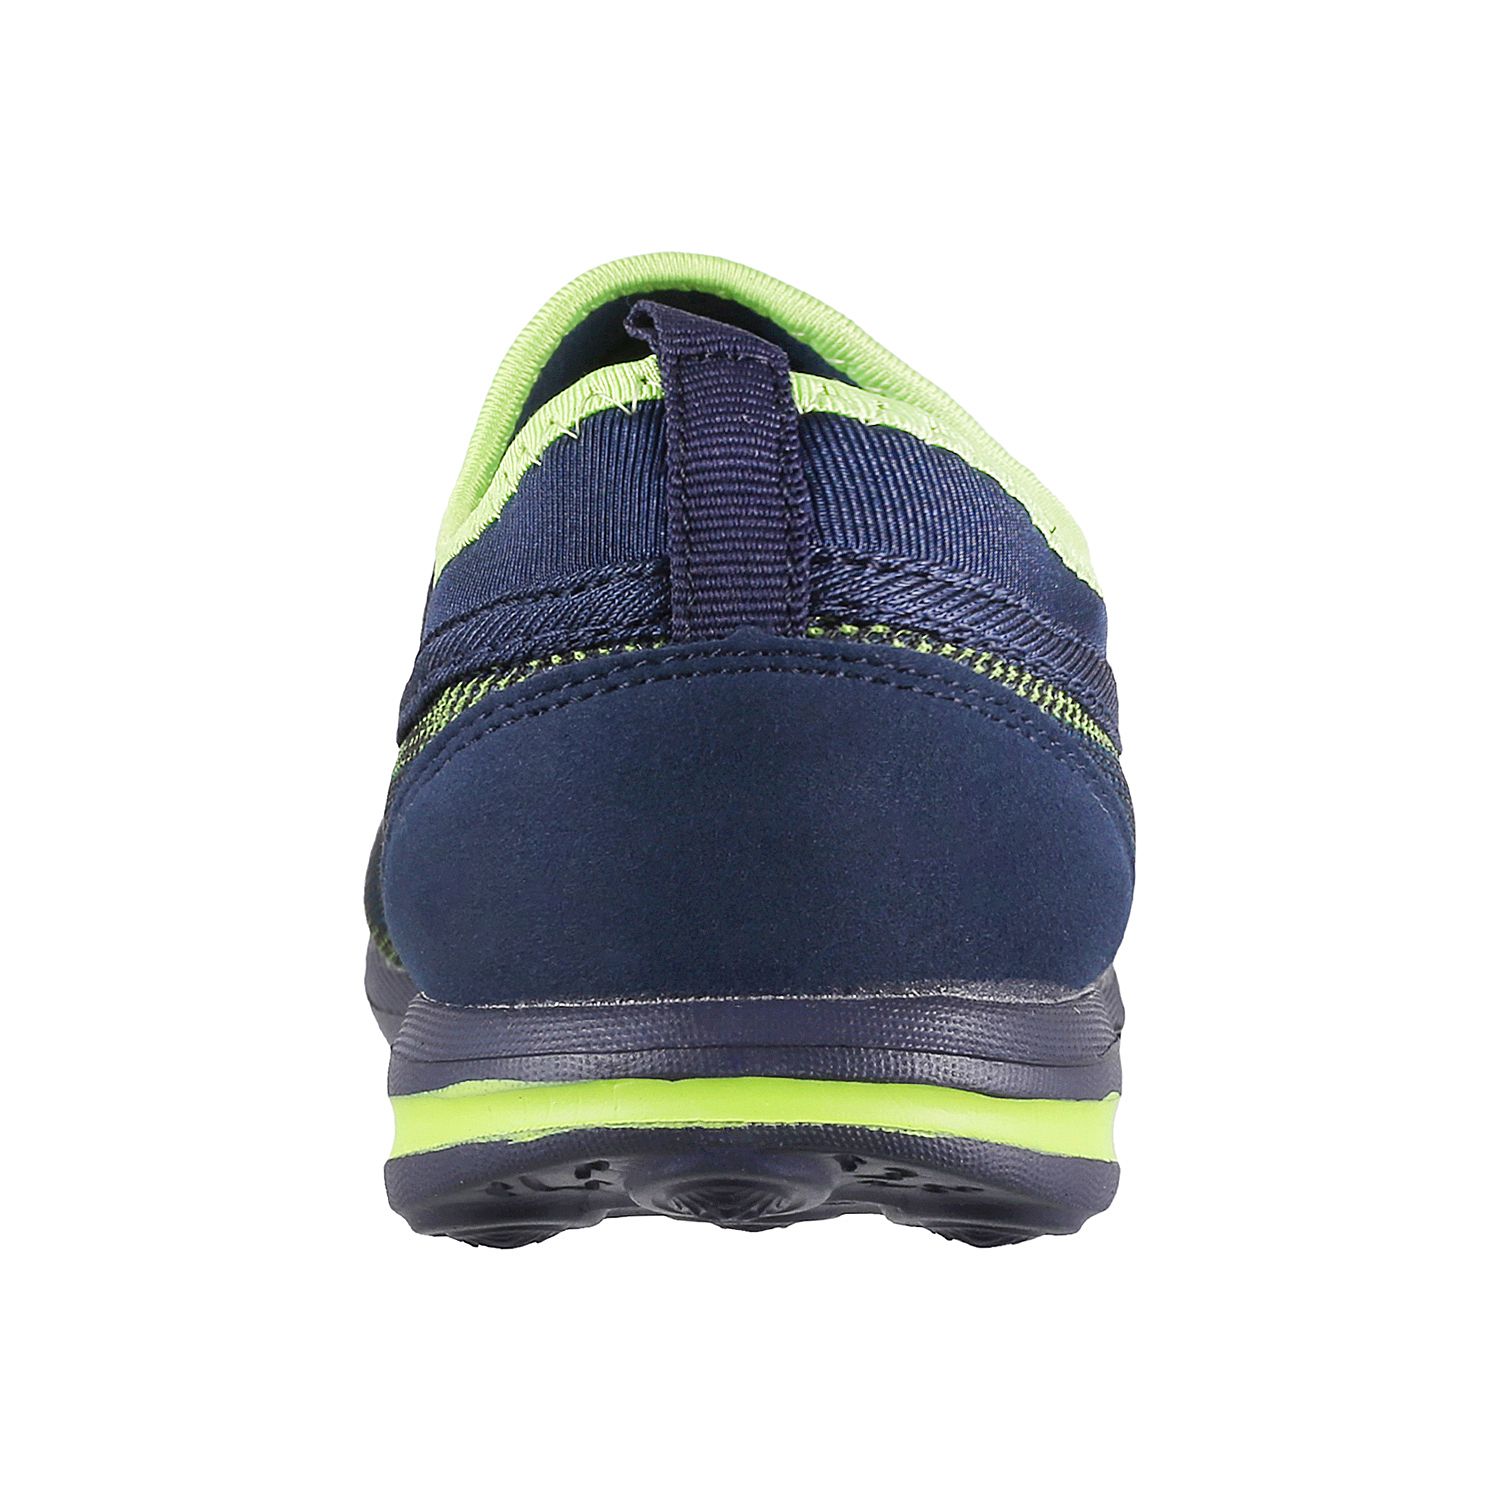 MOCHI BLUE Walking Shoes Price in India- Buy MOCHI BLUE Walking Shoes ...